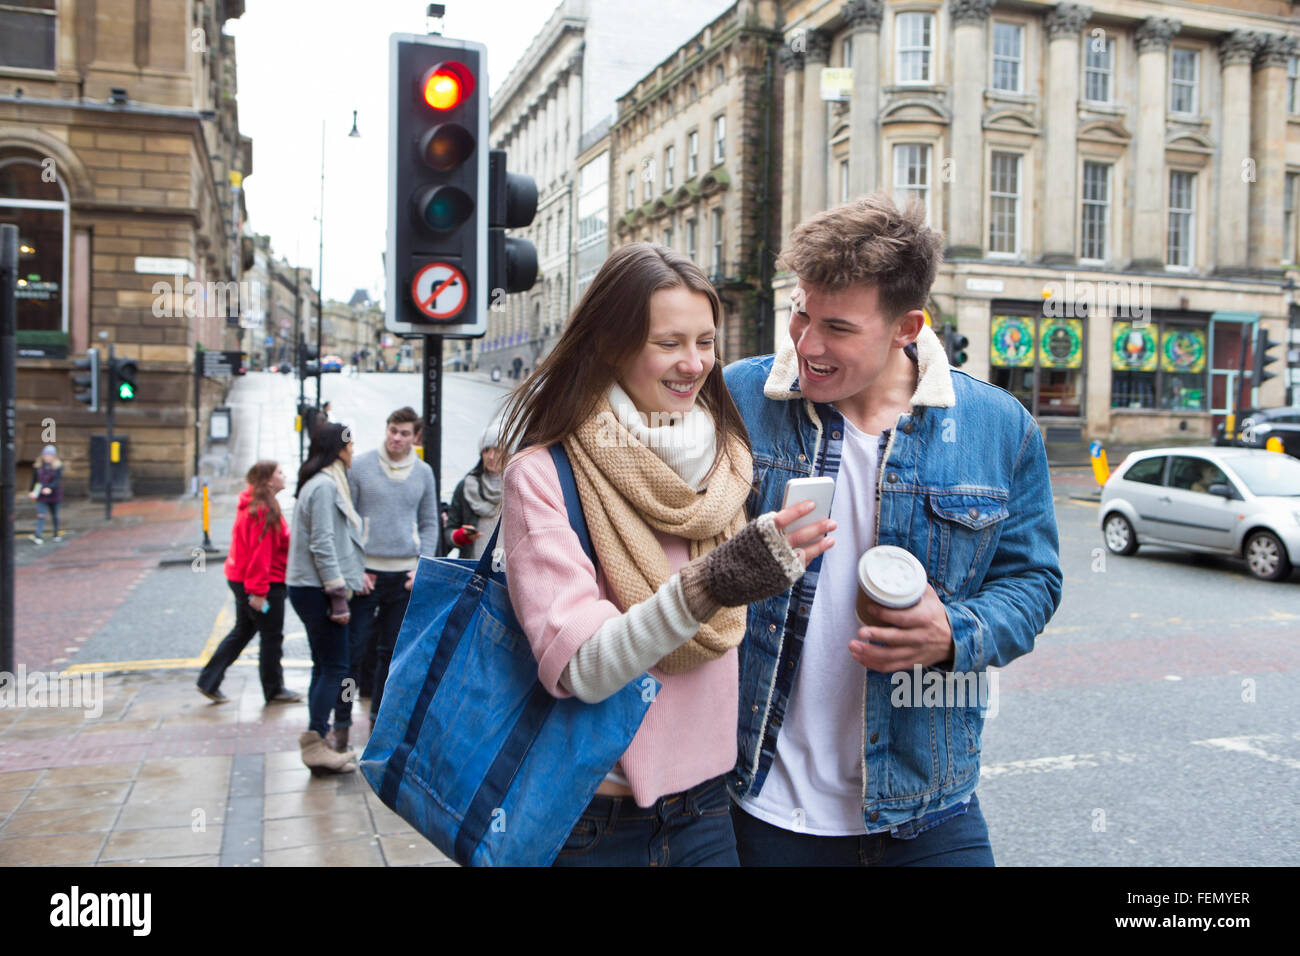 A young couple can be seen walking down a street looking at a smartphone together. Other young adults can be seen behind them. Stock Photo